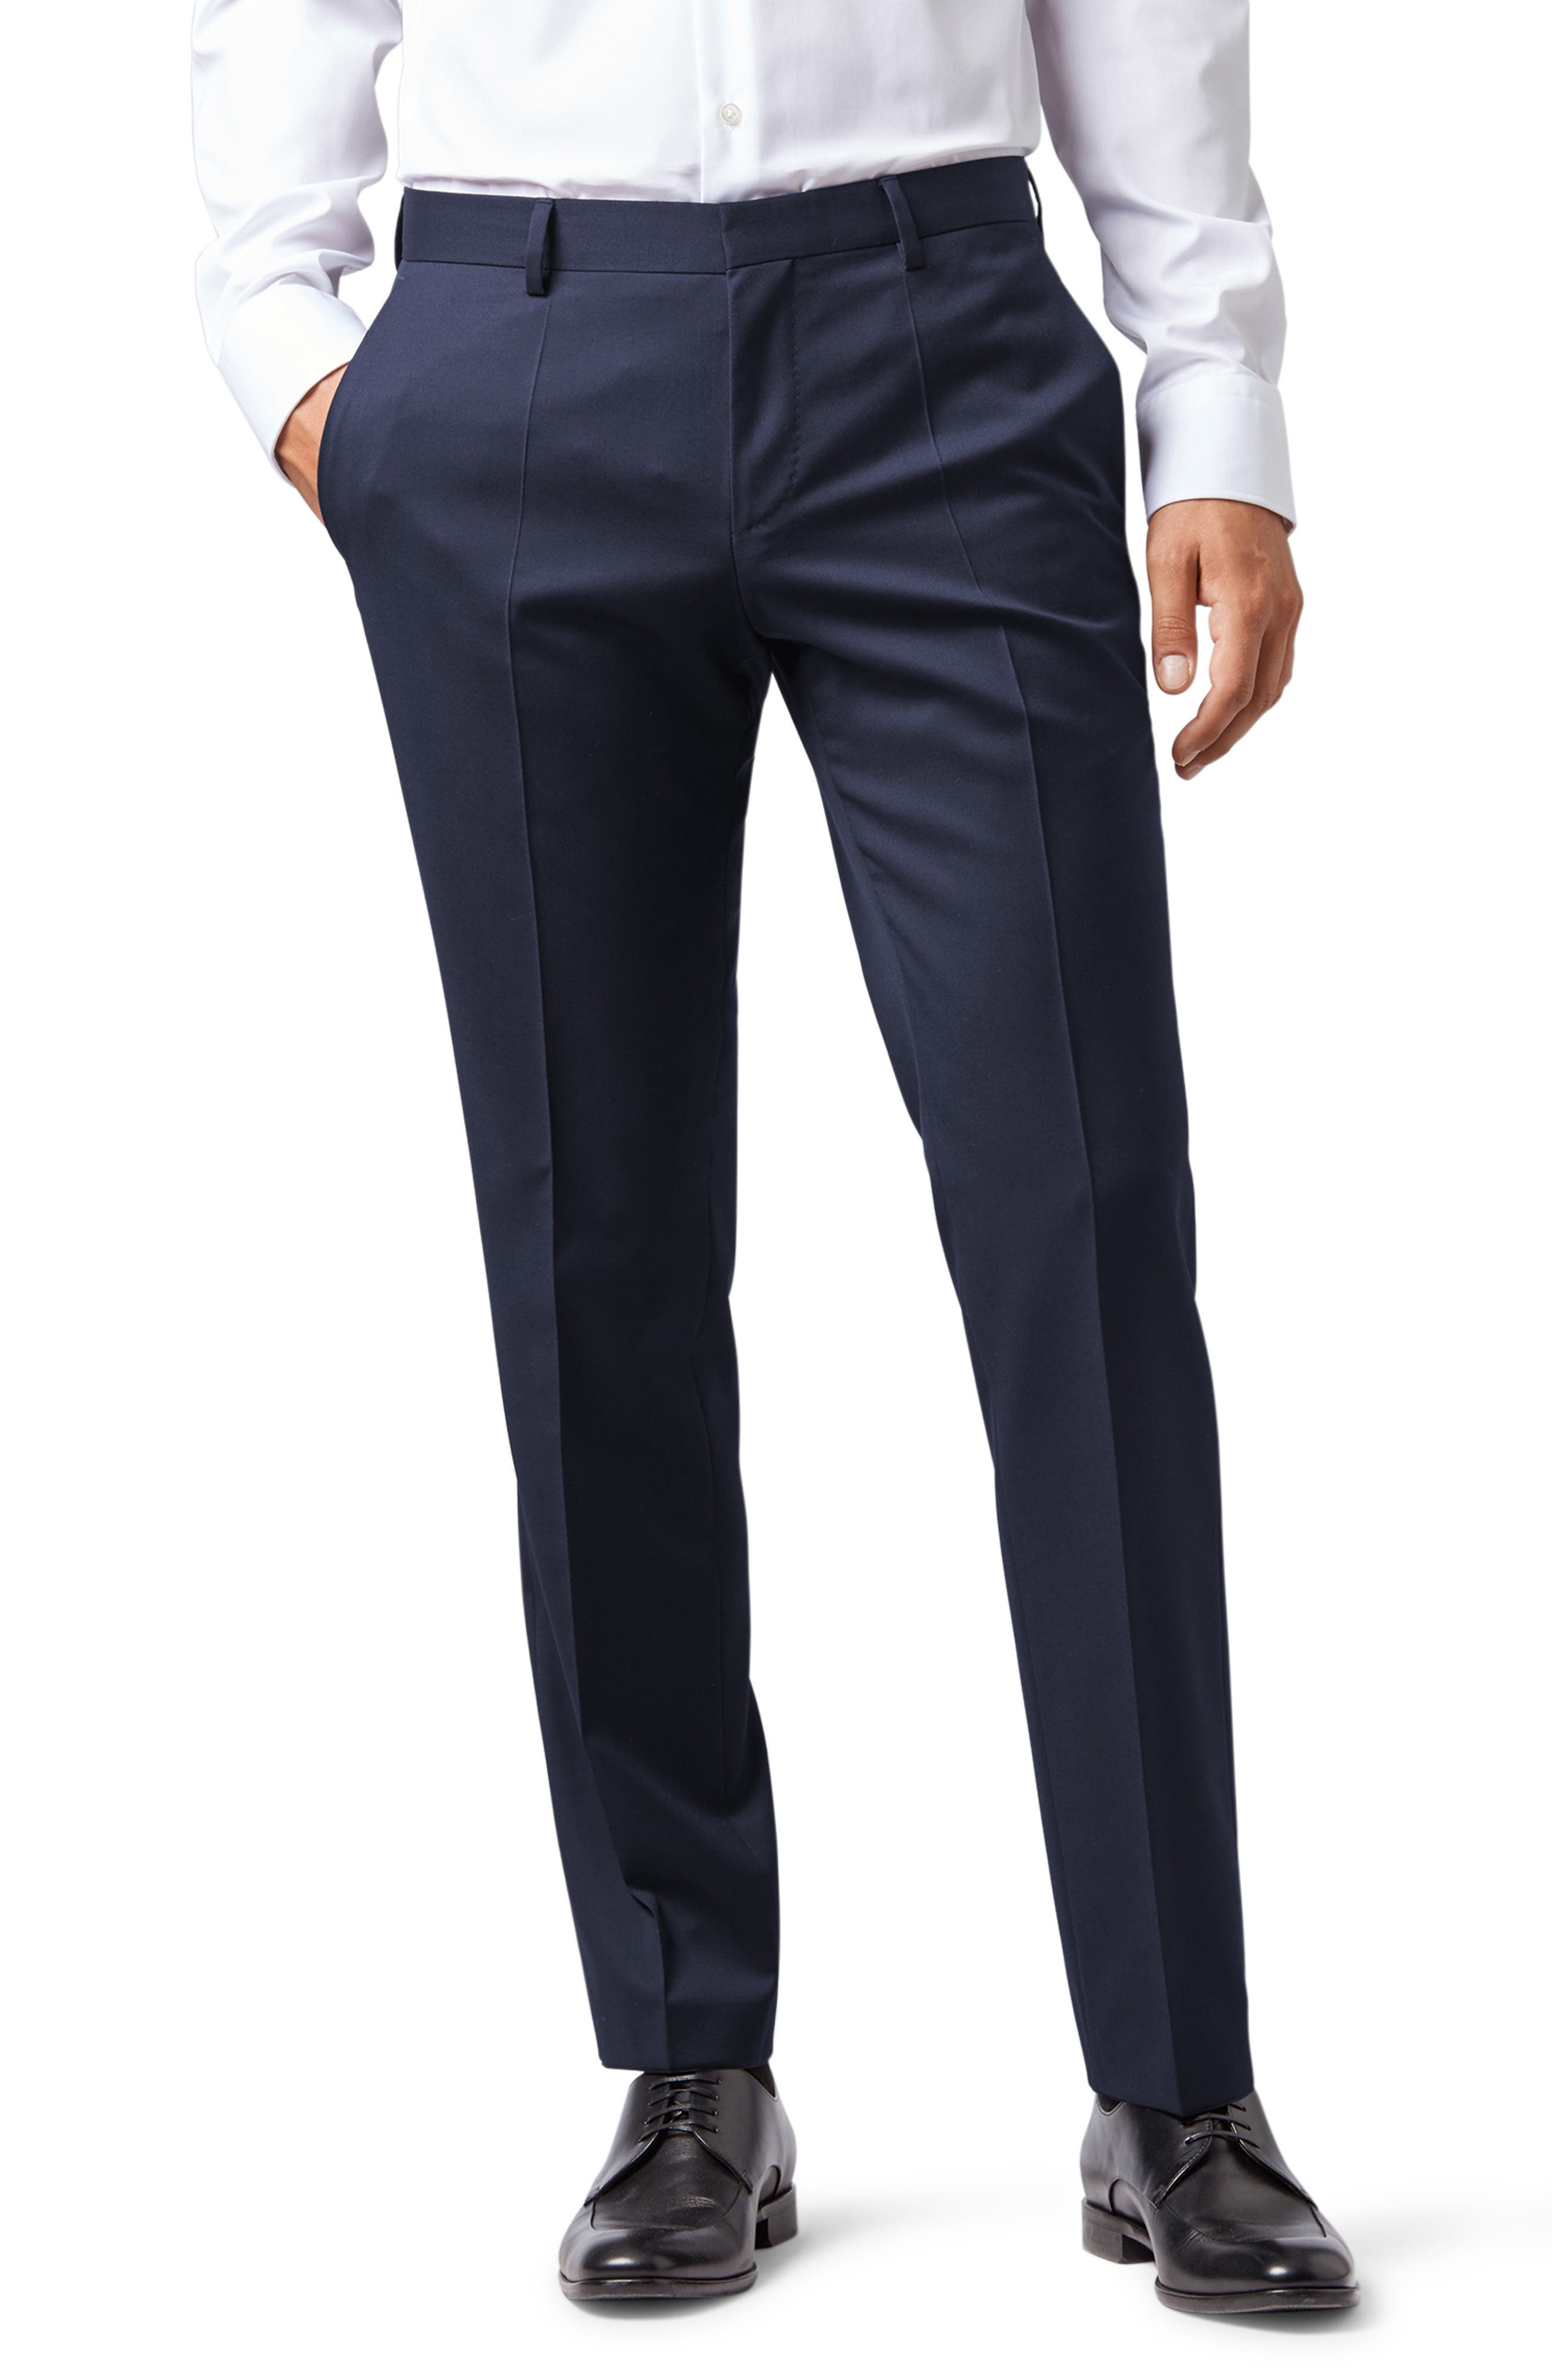 mens dress pants with loafers